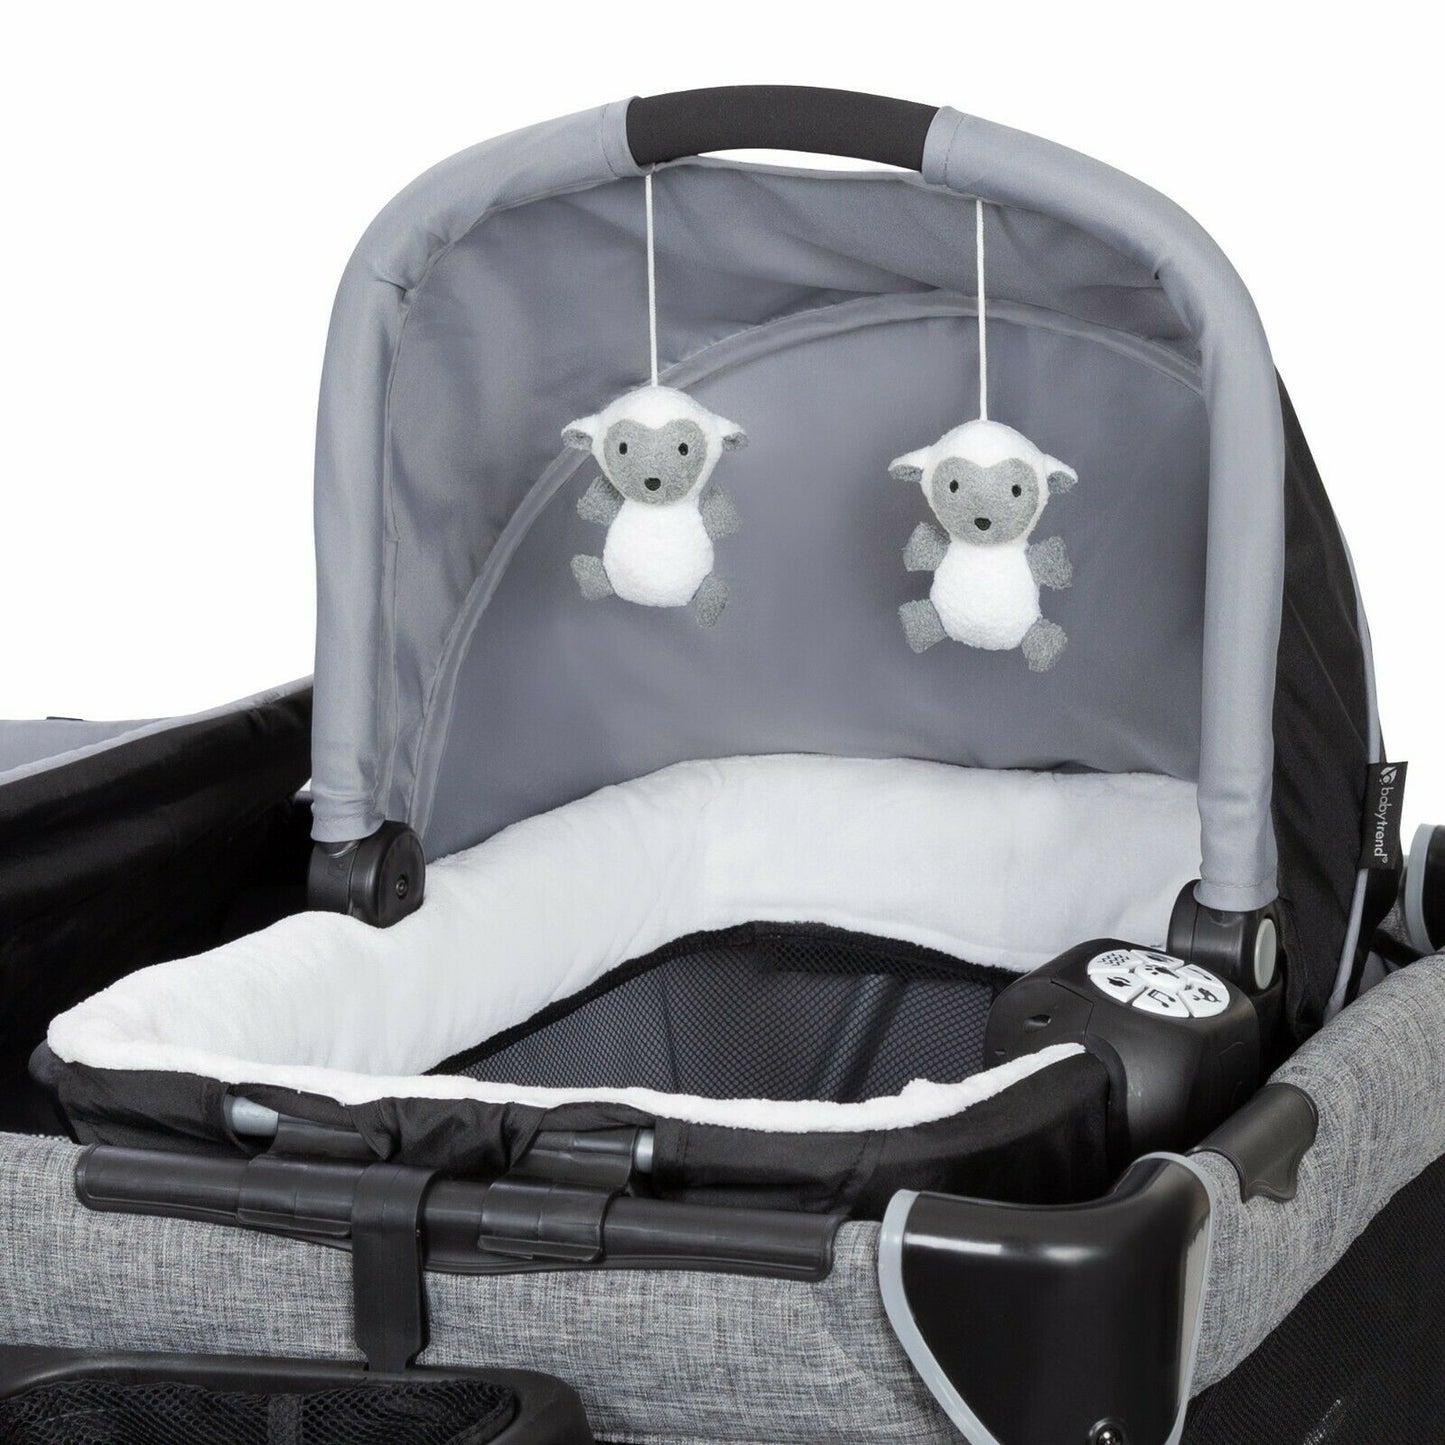 Baby Stroller with Car Seat Travel System Playard High Chair Diaper Bag Combo